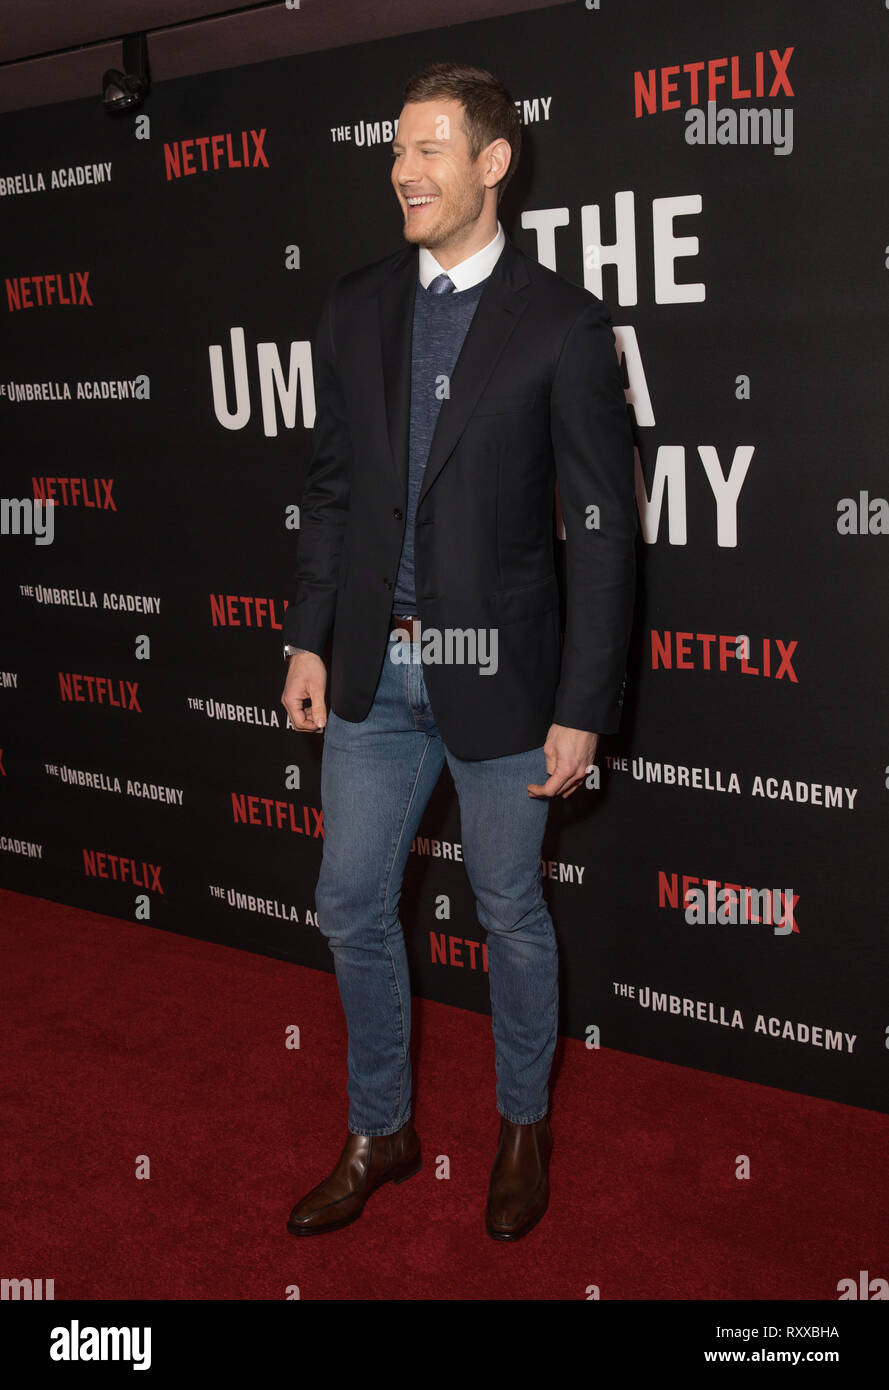 Cast attend photocall for forthcoming Netflix series 'The Umbrella Academy'  Featuring: Tom Hopper Where: London, United Kingdom When: 07 Feb 2019  Credit: Phil Lewis/WENN.com Stock Photo - Alamy